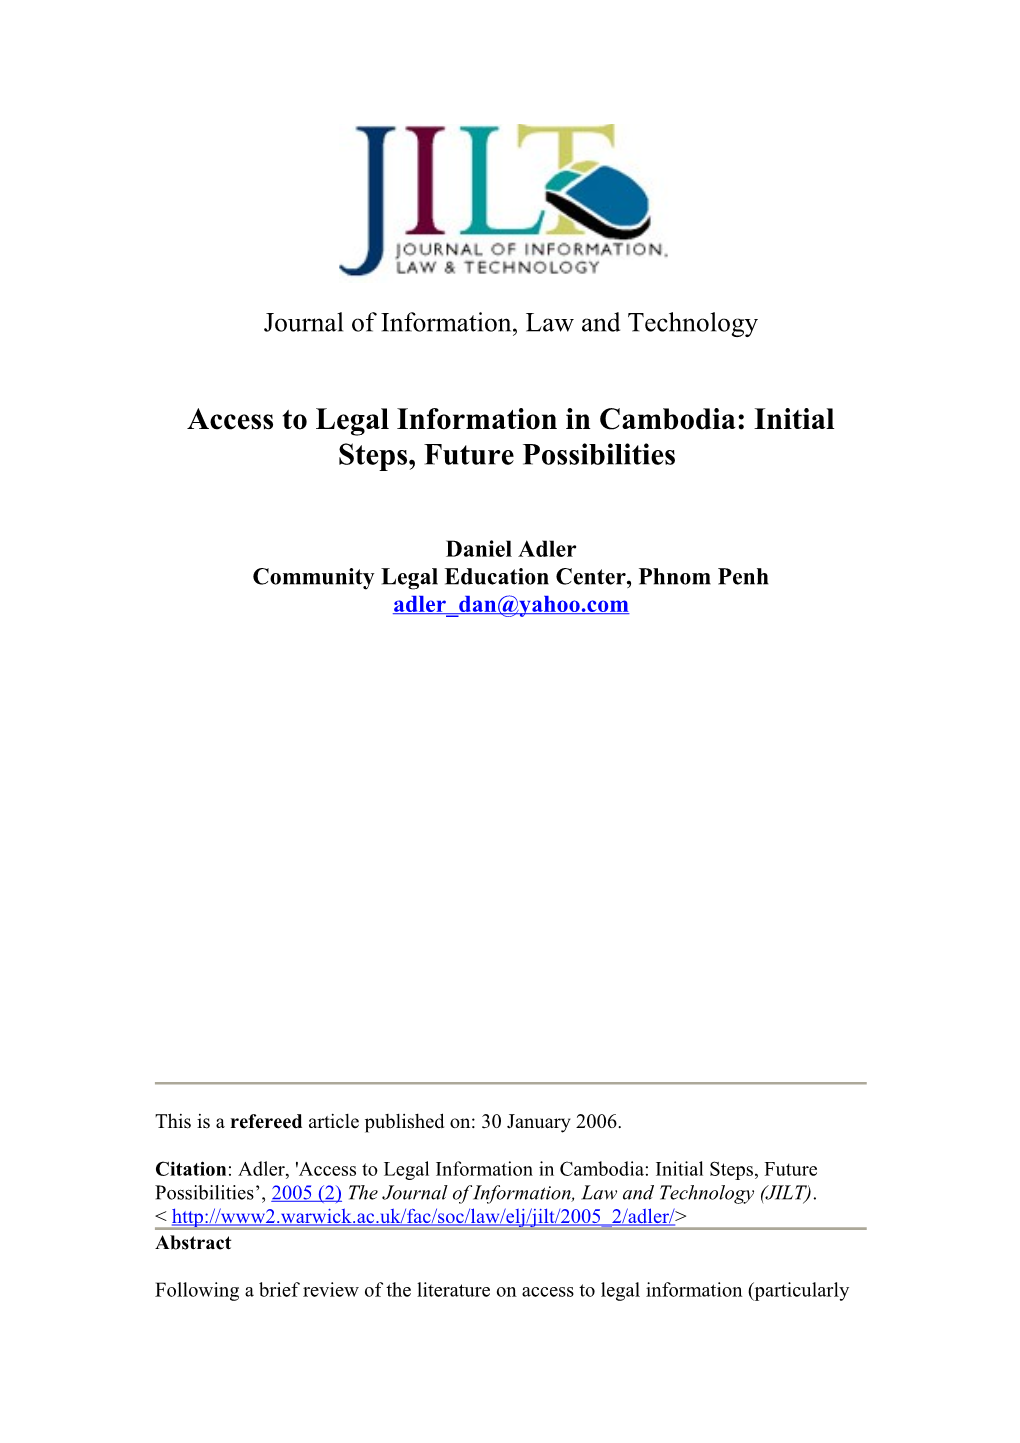 Access to Legal Information in Cambodia: Initial Steps, Future Possibilities